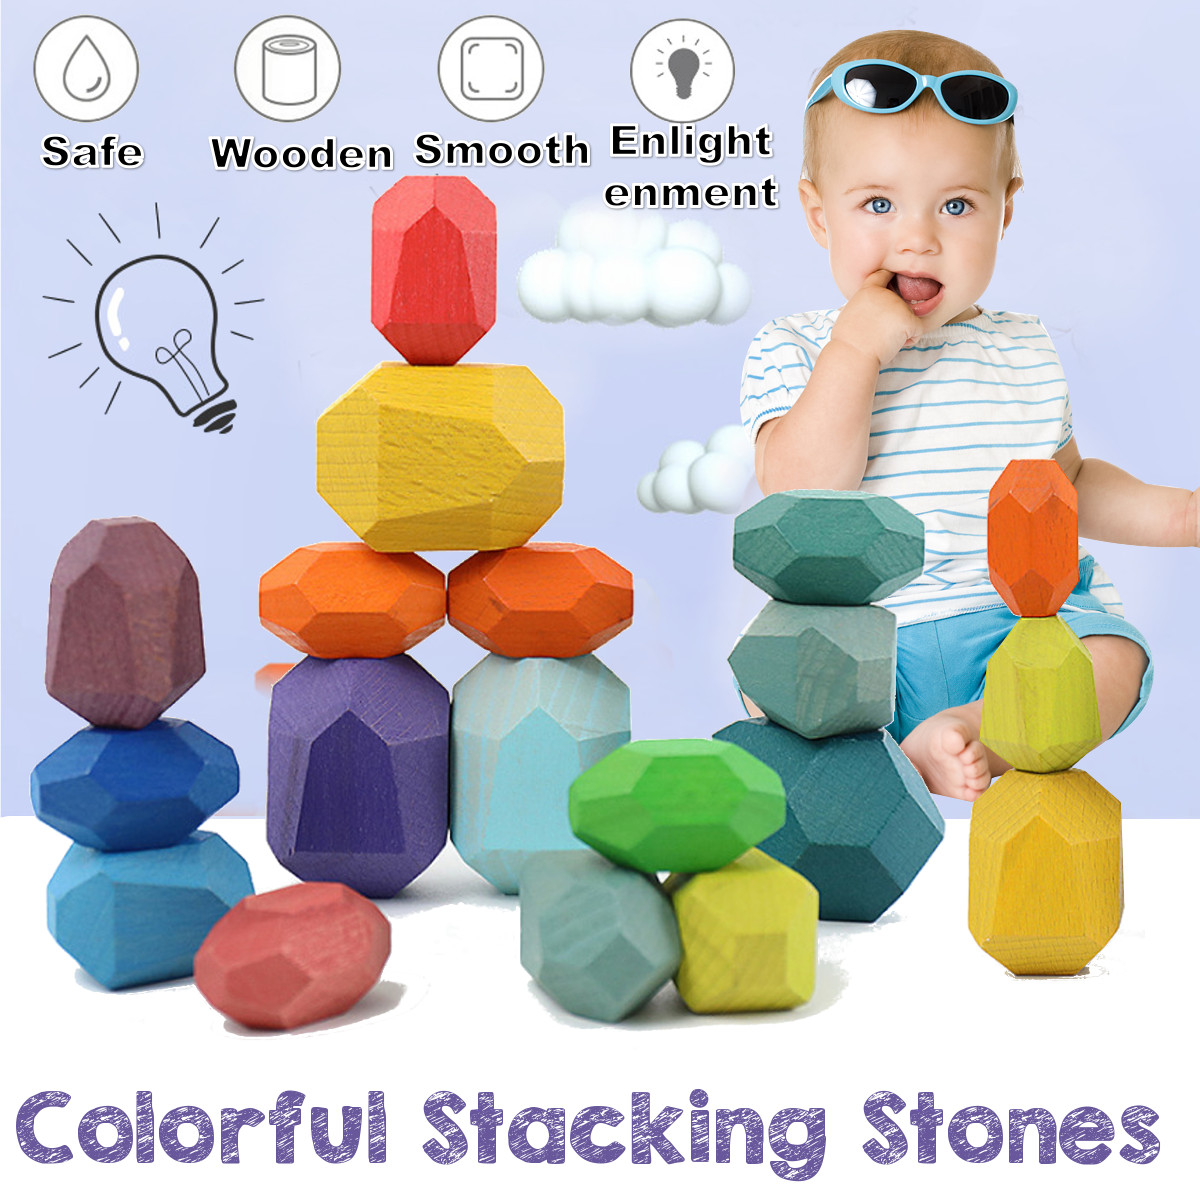 101626-Pcs-Wood-Colorful-Stone-Stacking-Game-Building-Block-Education-Set-Toy-for-Kids-Gift-1887123-2